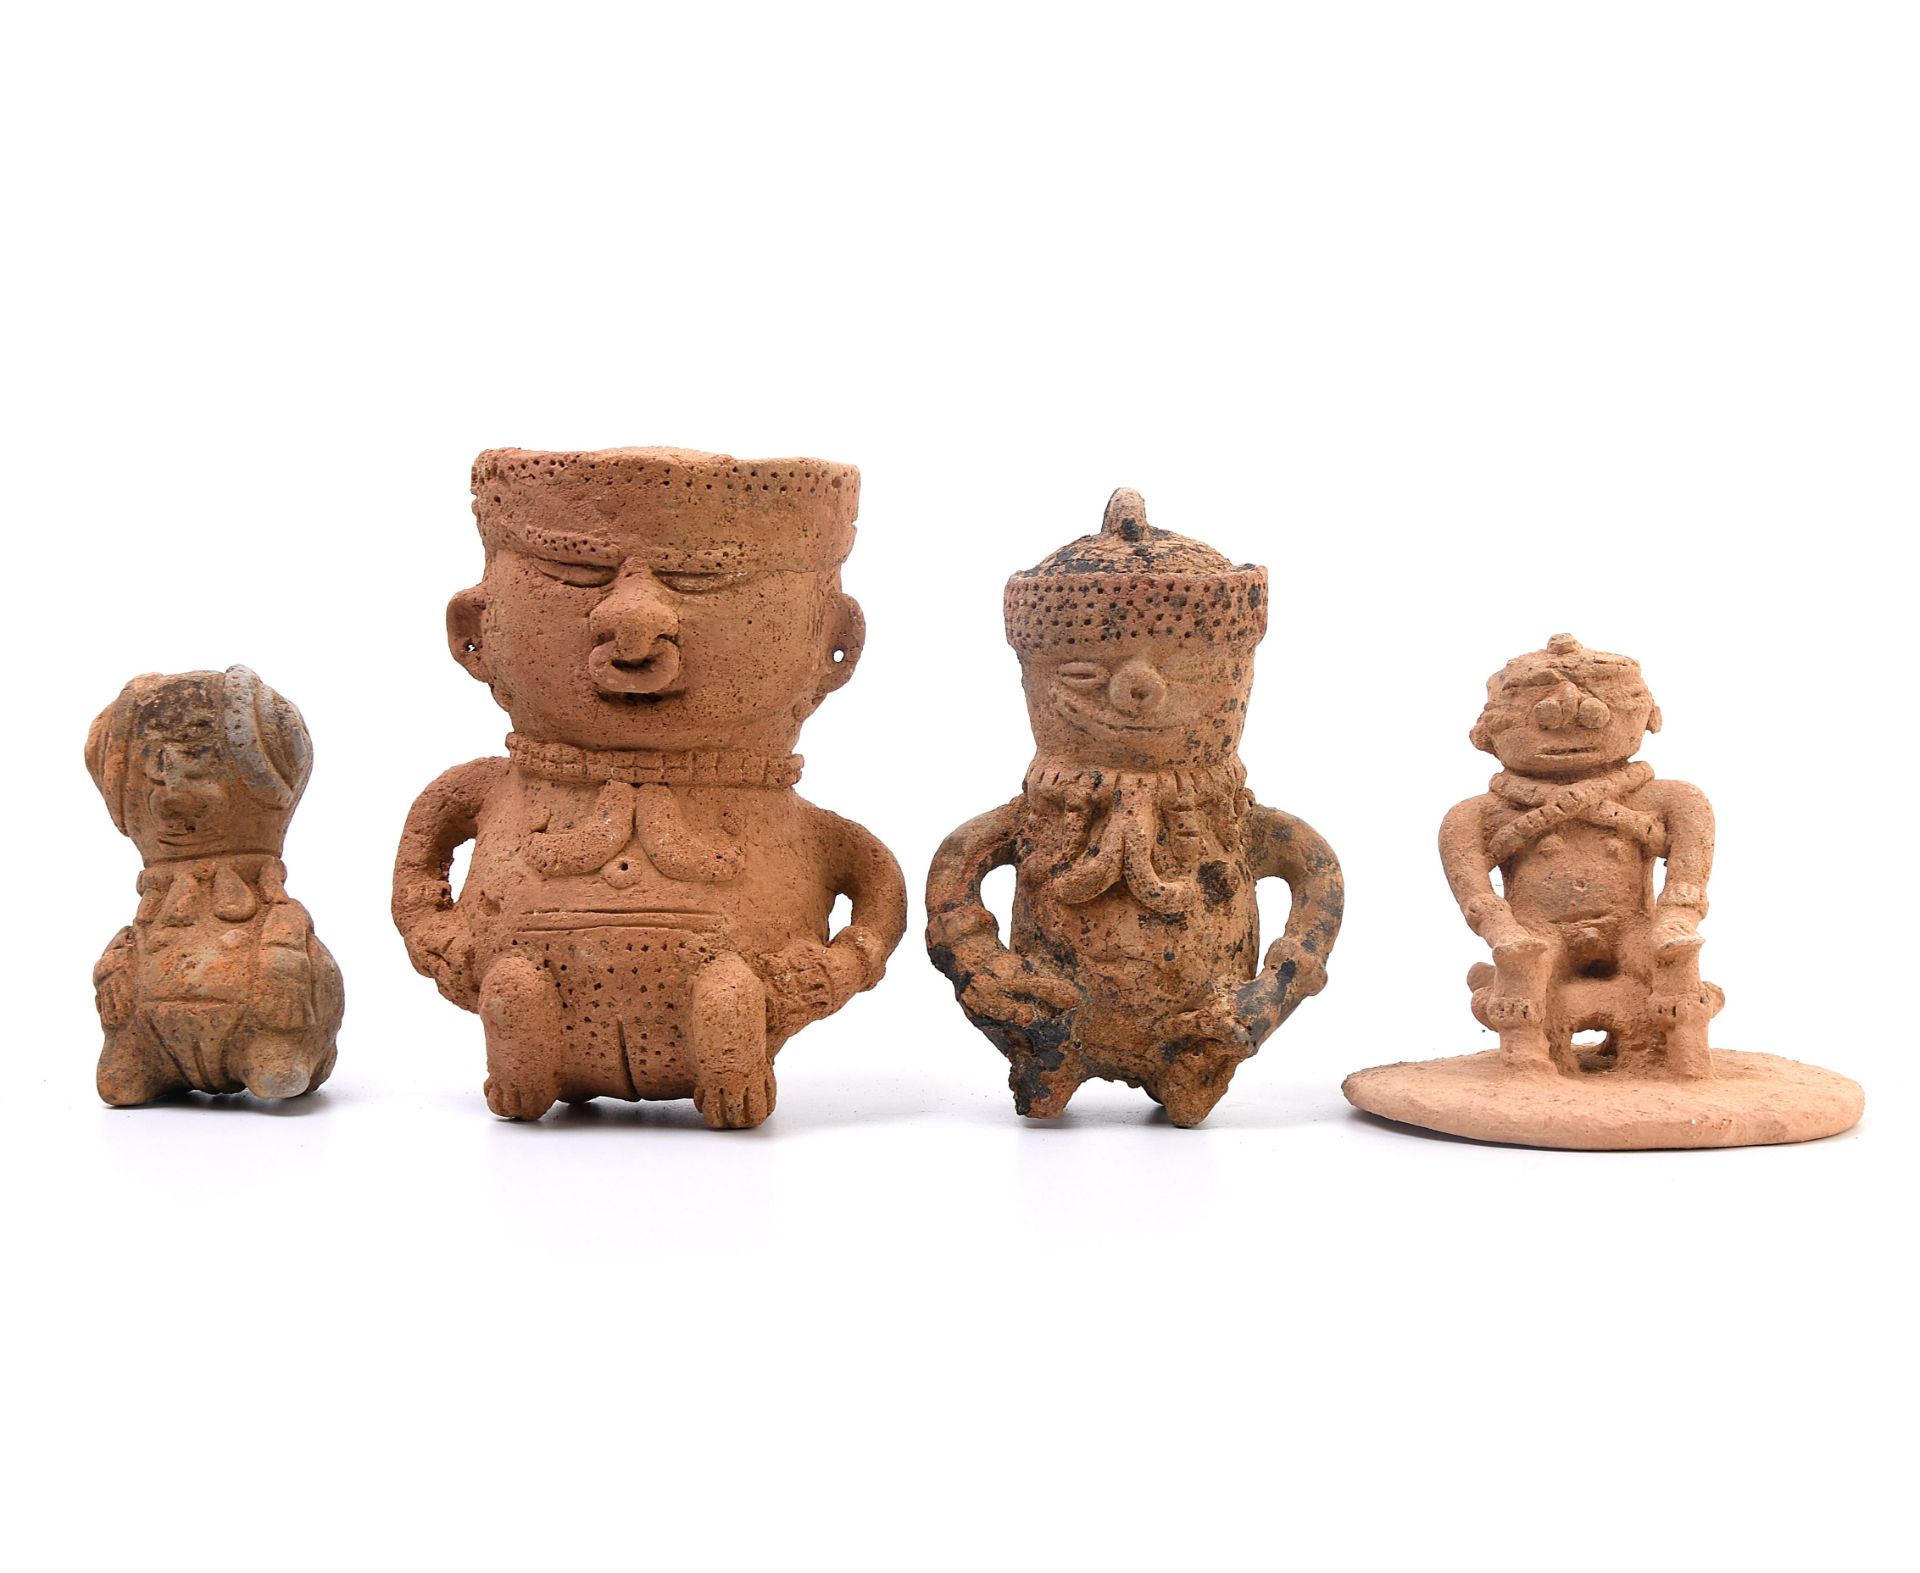 Colombia, Sinu region, four terracotta figures, ca. 1200-1400 AD. - Image 2 of 4